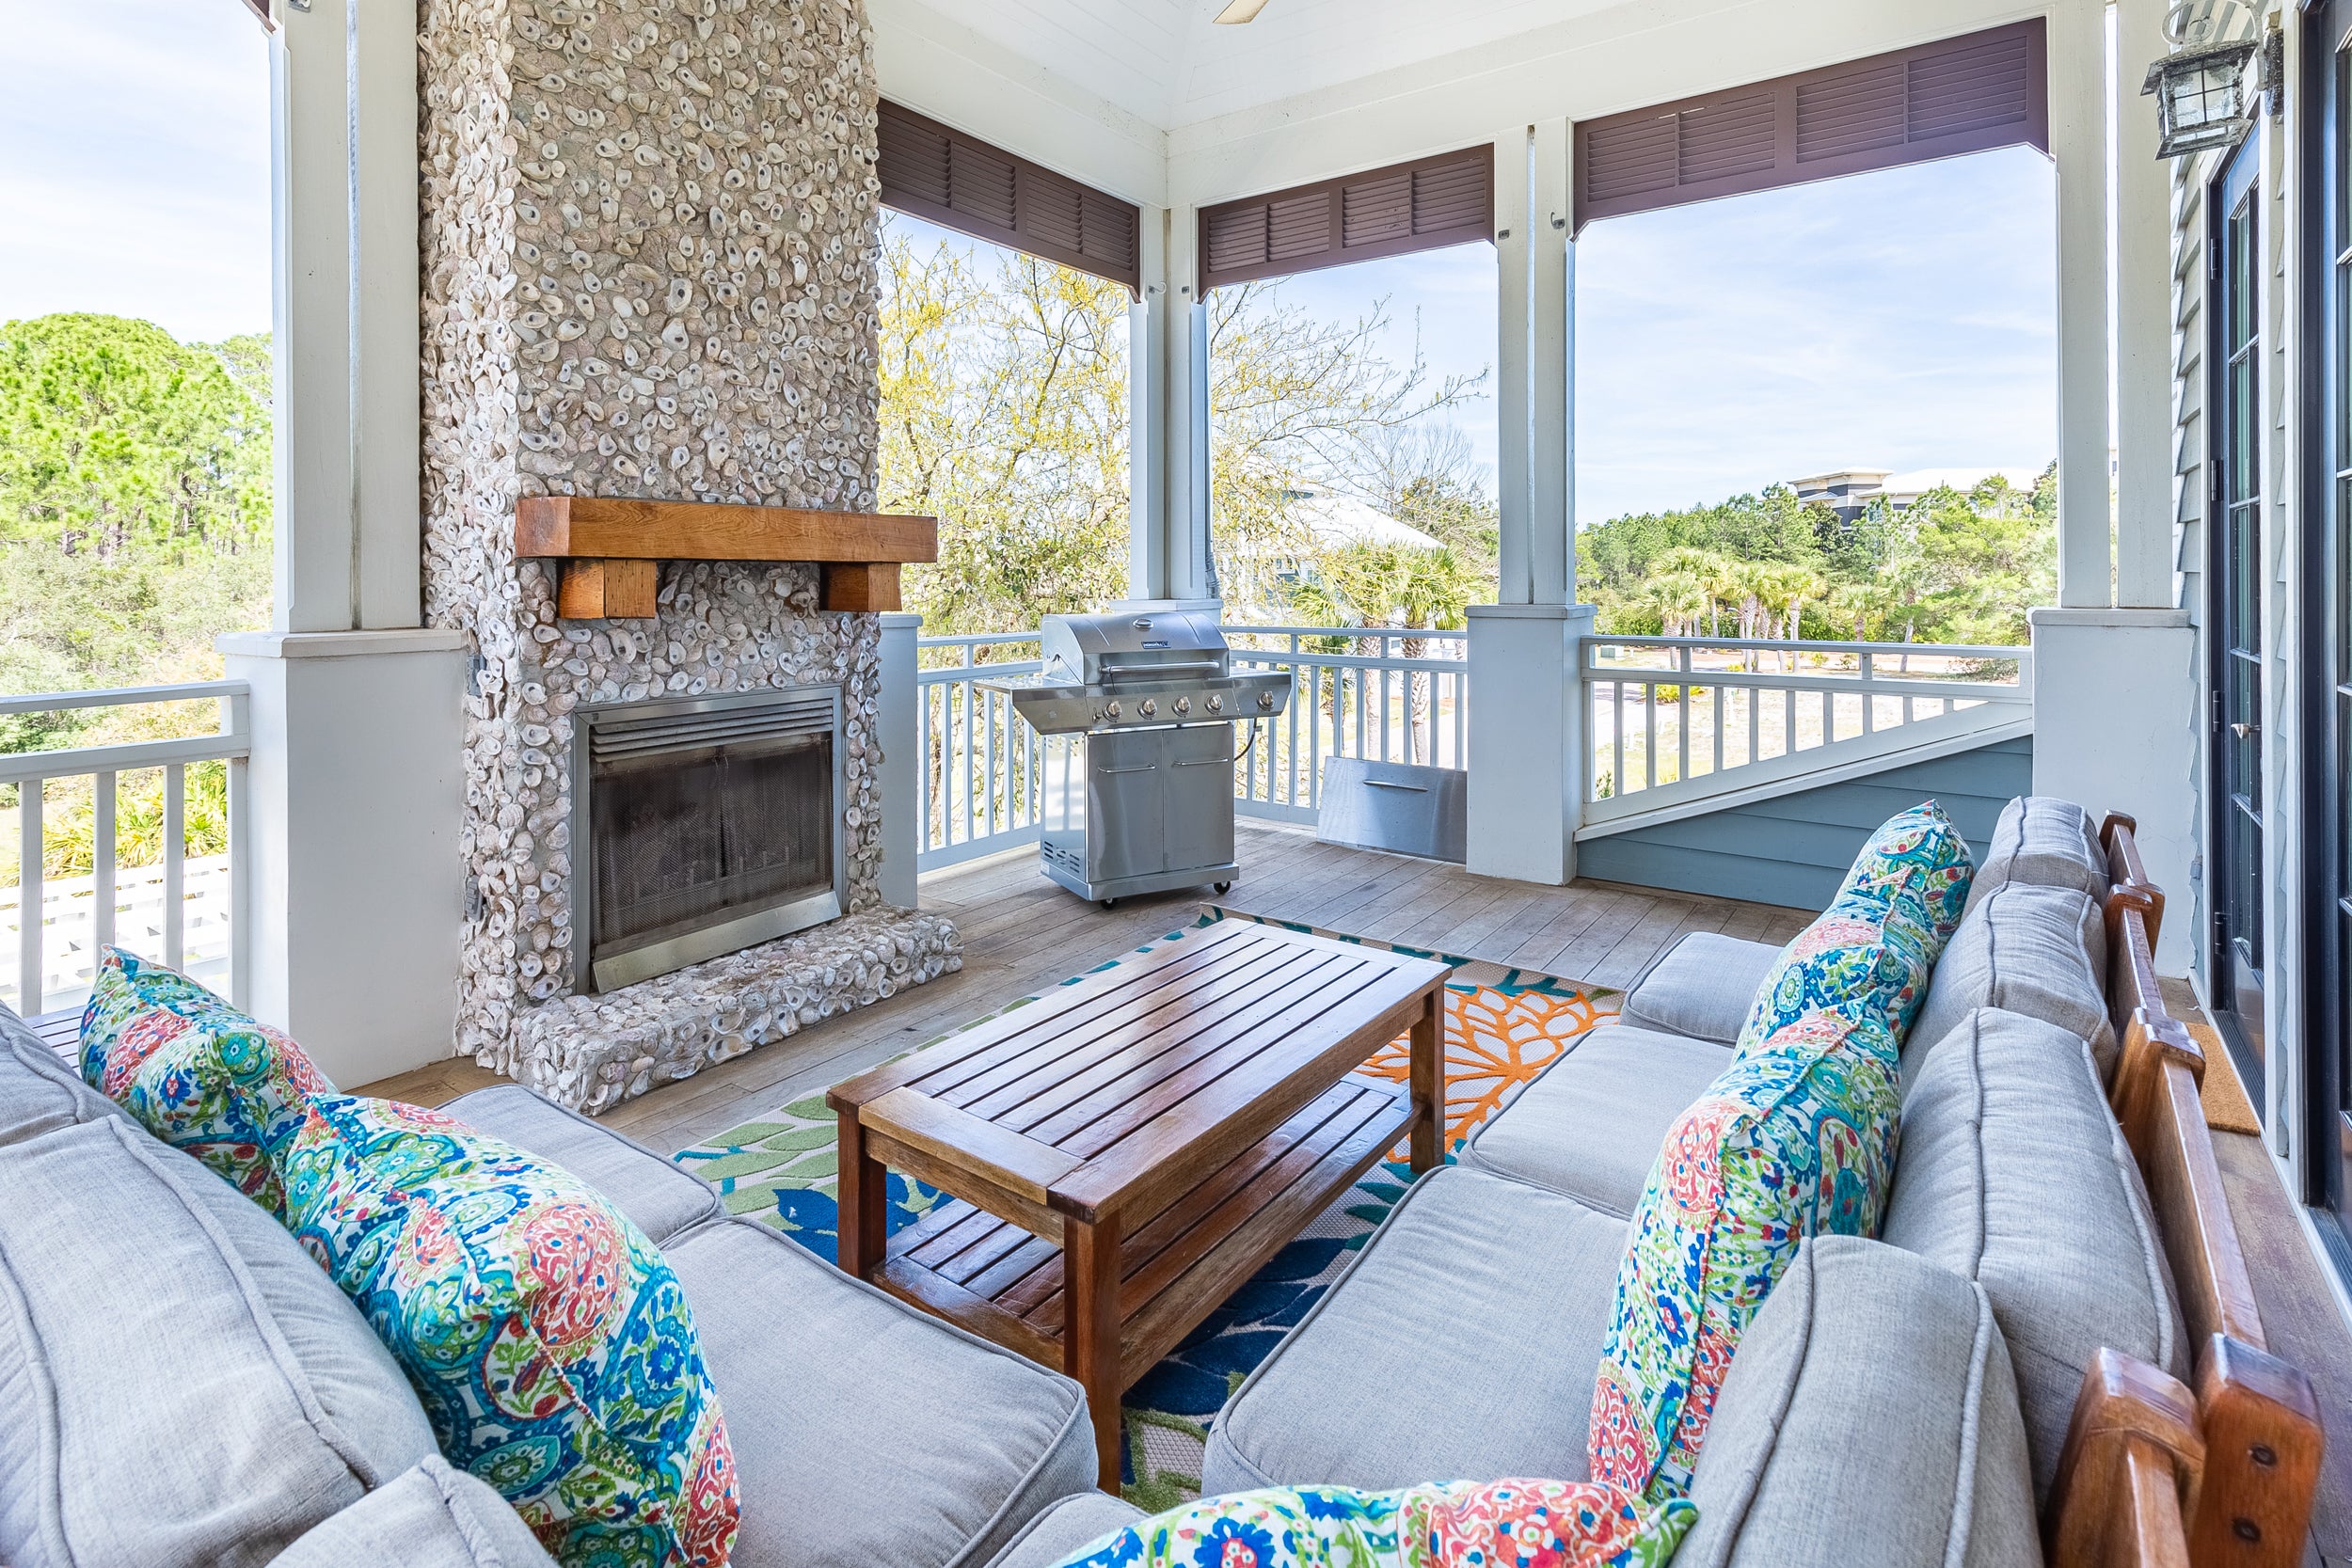 Stunning Oyster Shell fireplace on covered porch